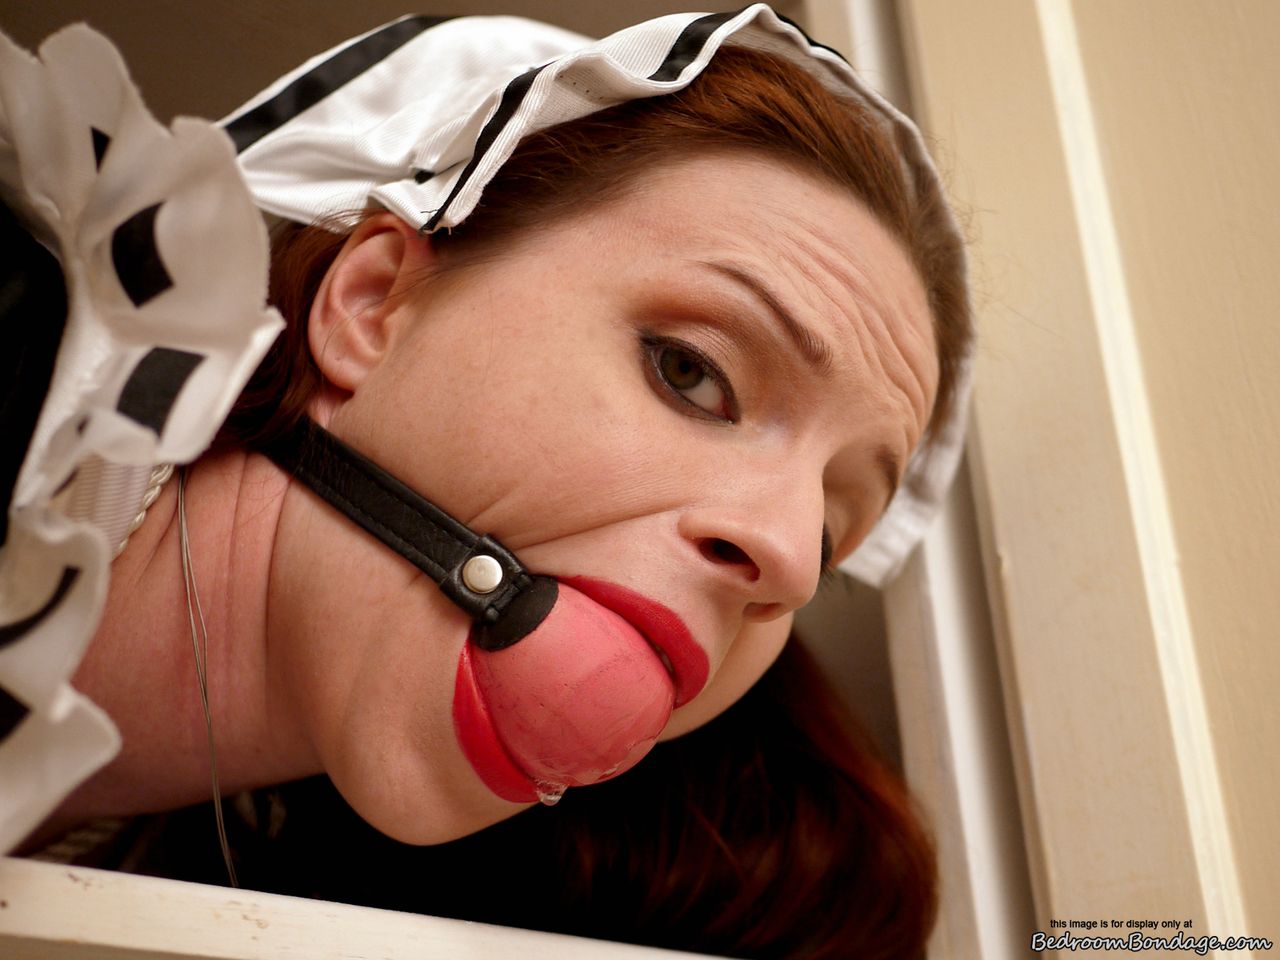 Clever maid: Caucasian maid Claire Adams is ballgagged and bound in closets.